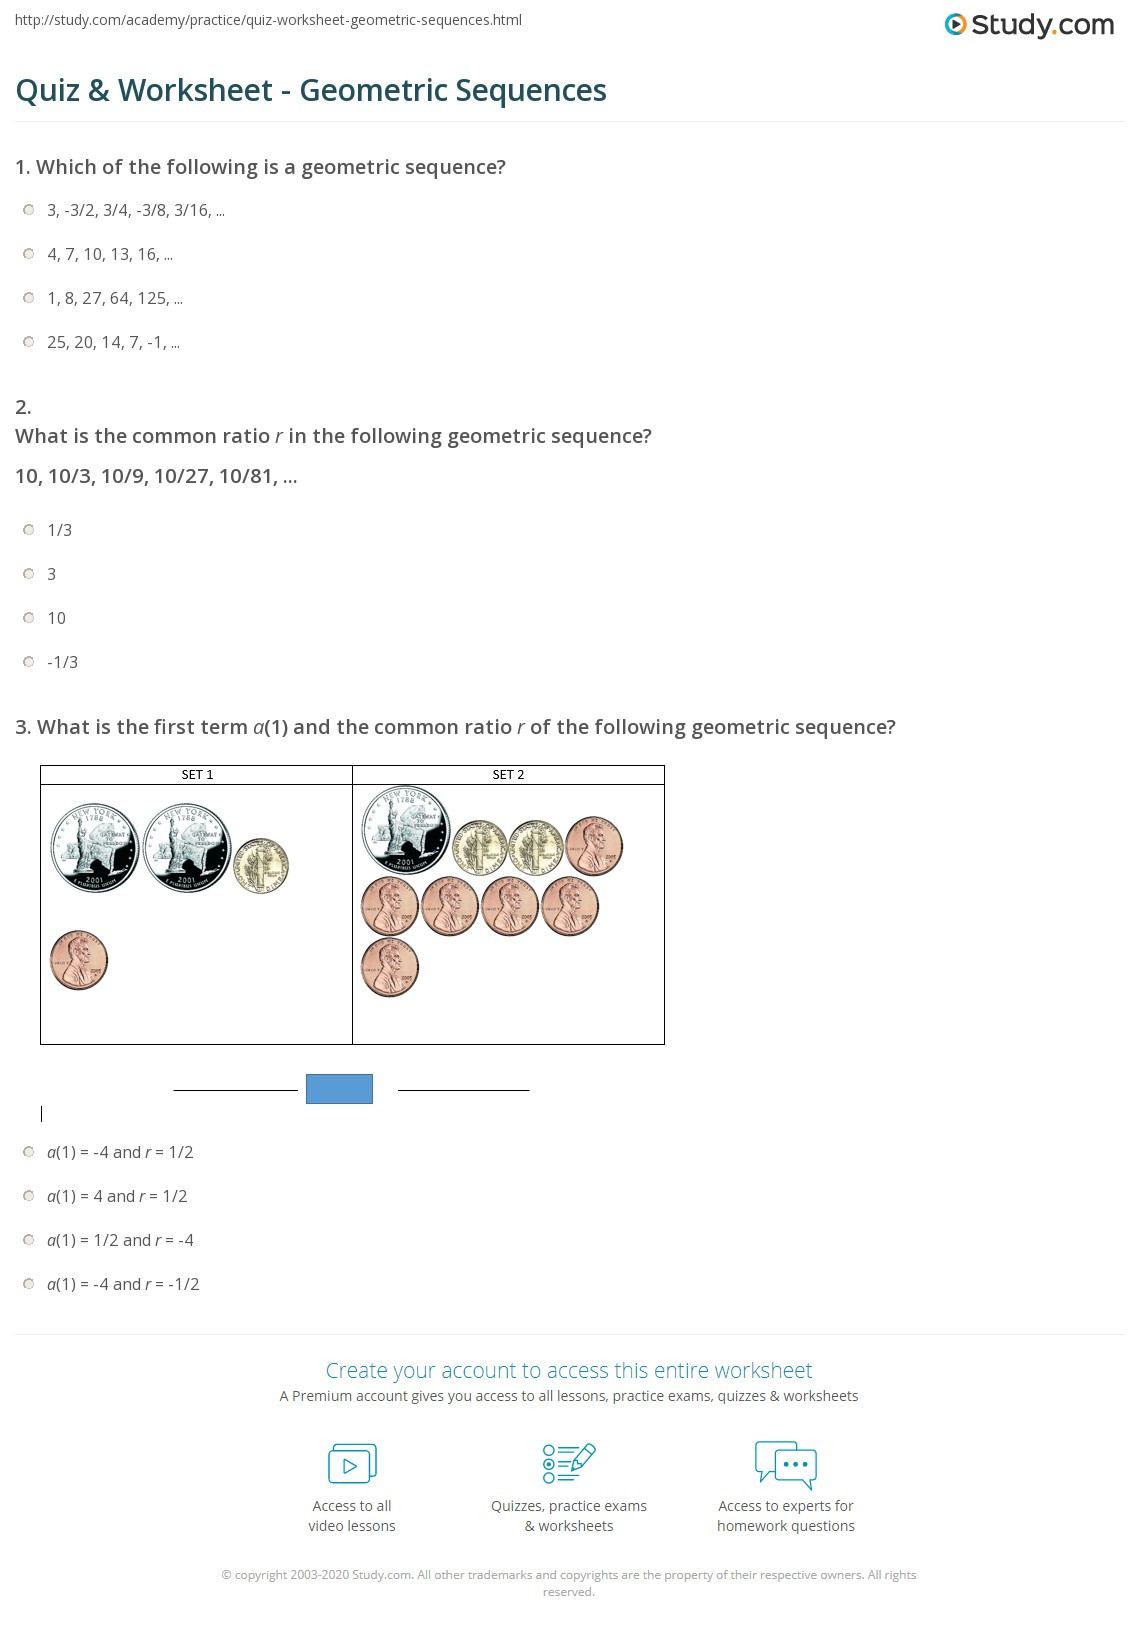 Geometric Sequences Worksheet Answers Quiz &amp; Worksheet Geometric Sequences